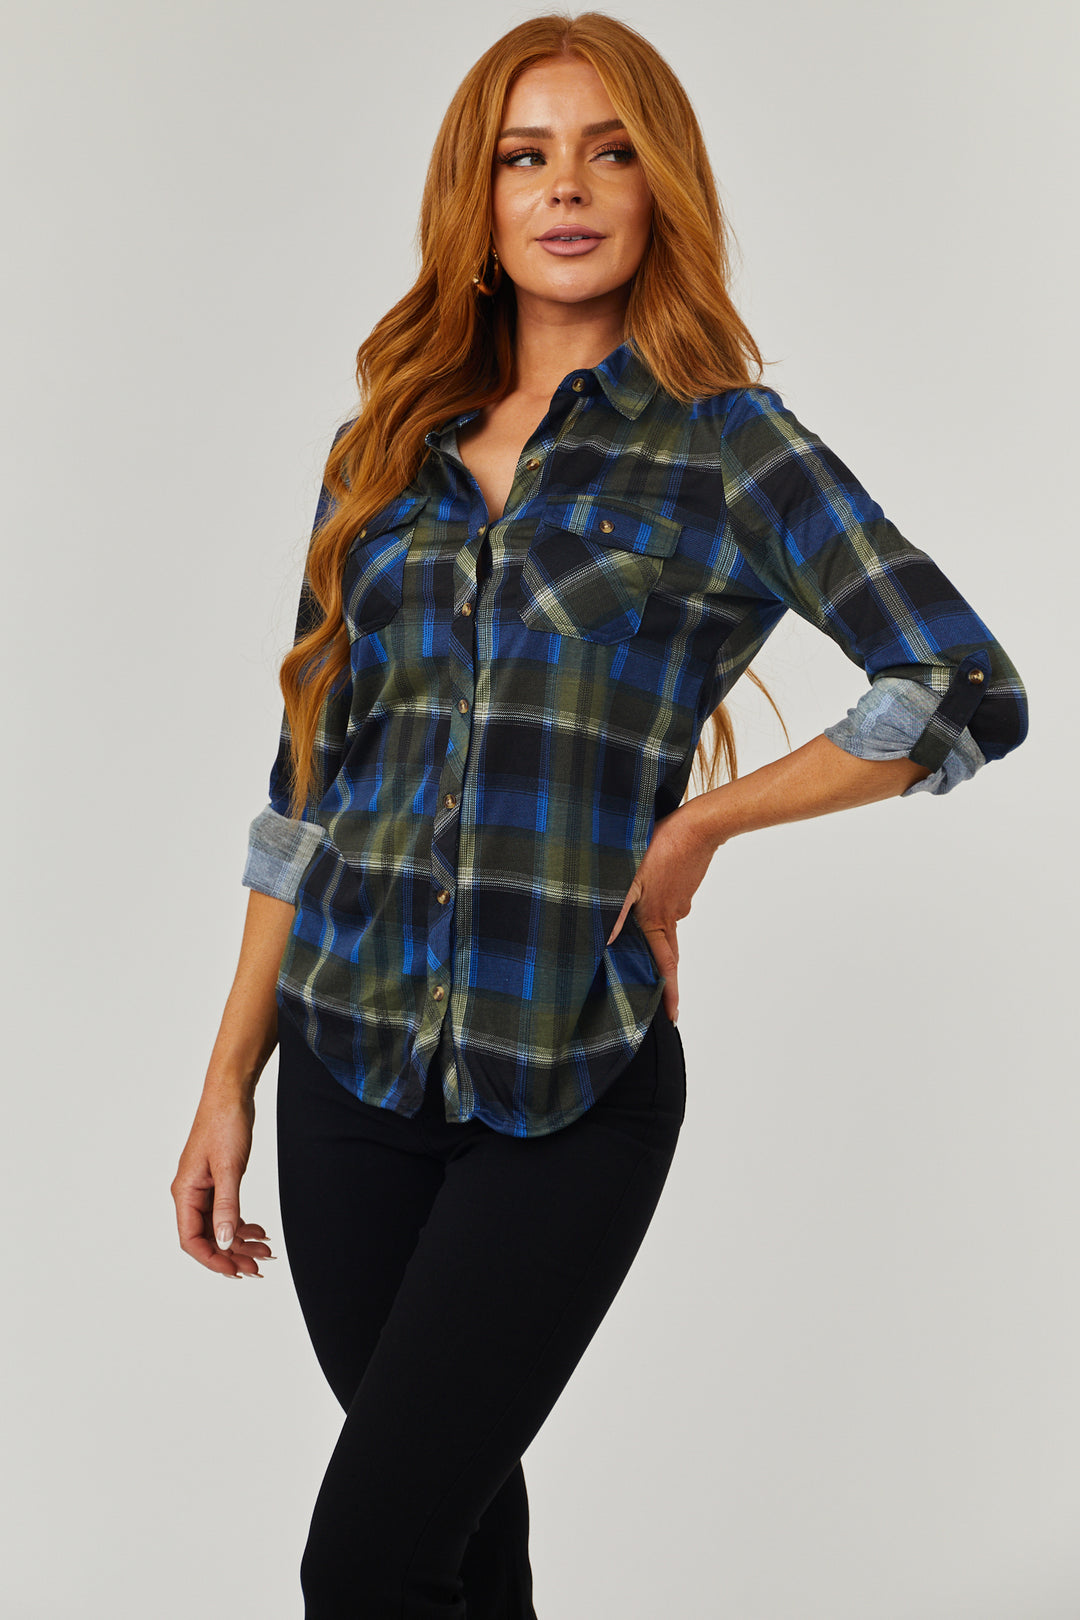 Cobalt and Forest Plaid Top with Chest Pocket & Lime Lush